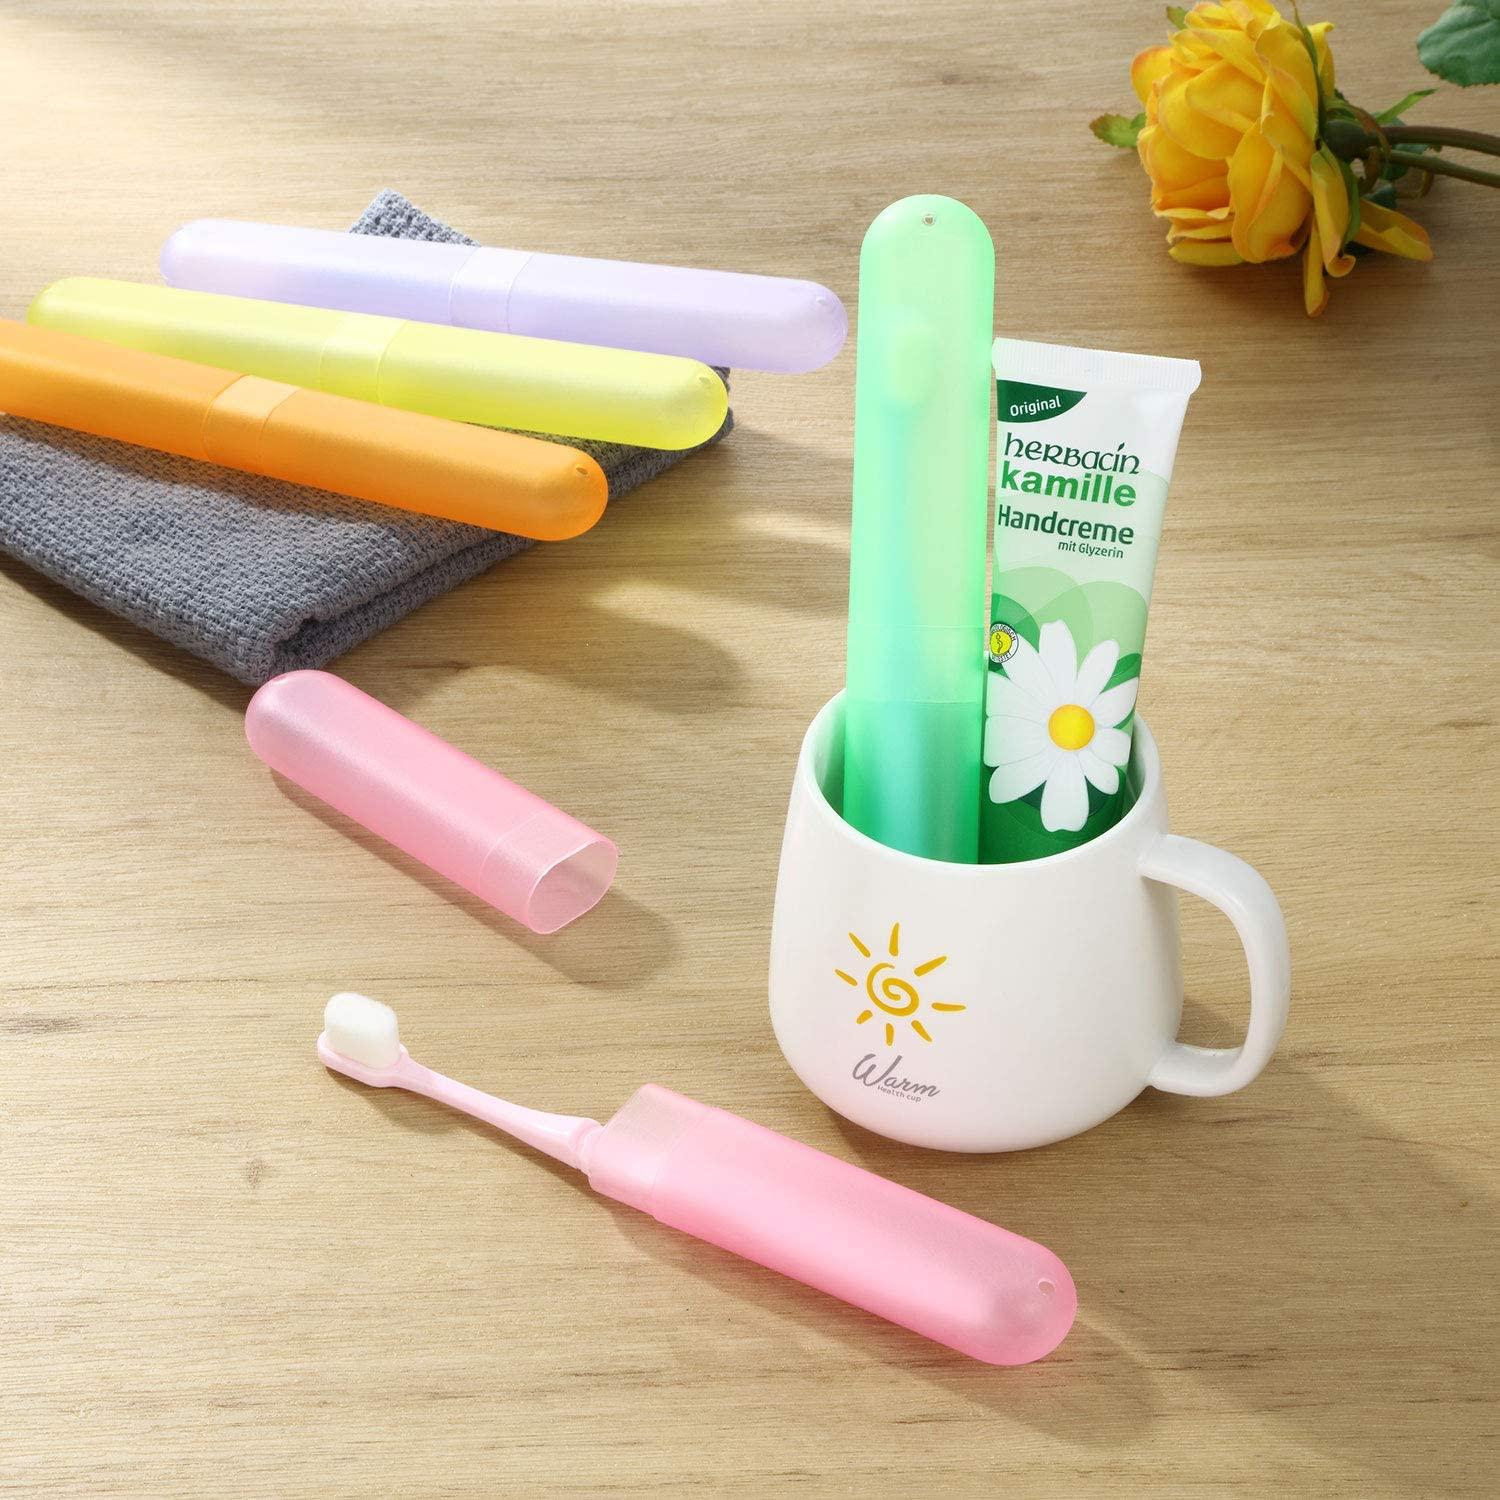 20 Pieces Travel Toothbrush Case Holder, Portable Toothbrush